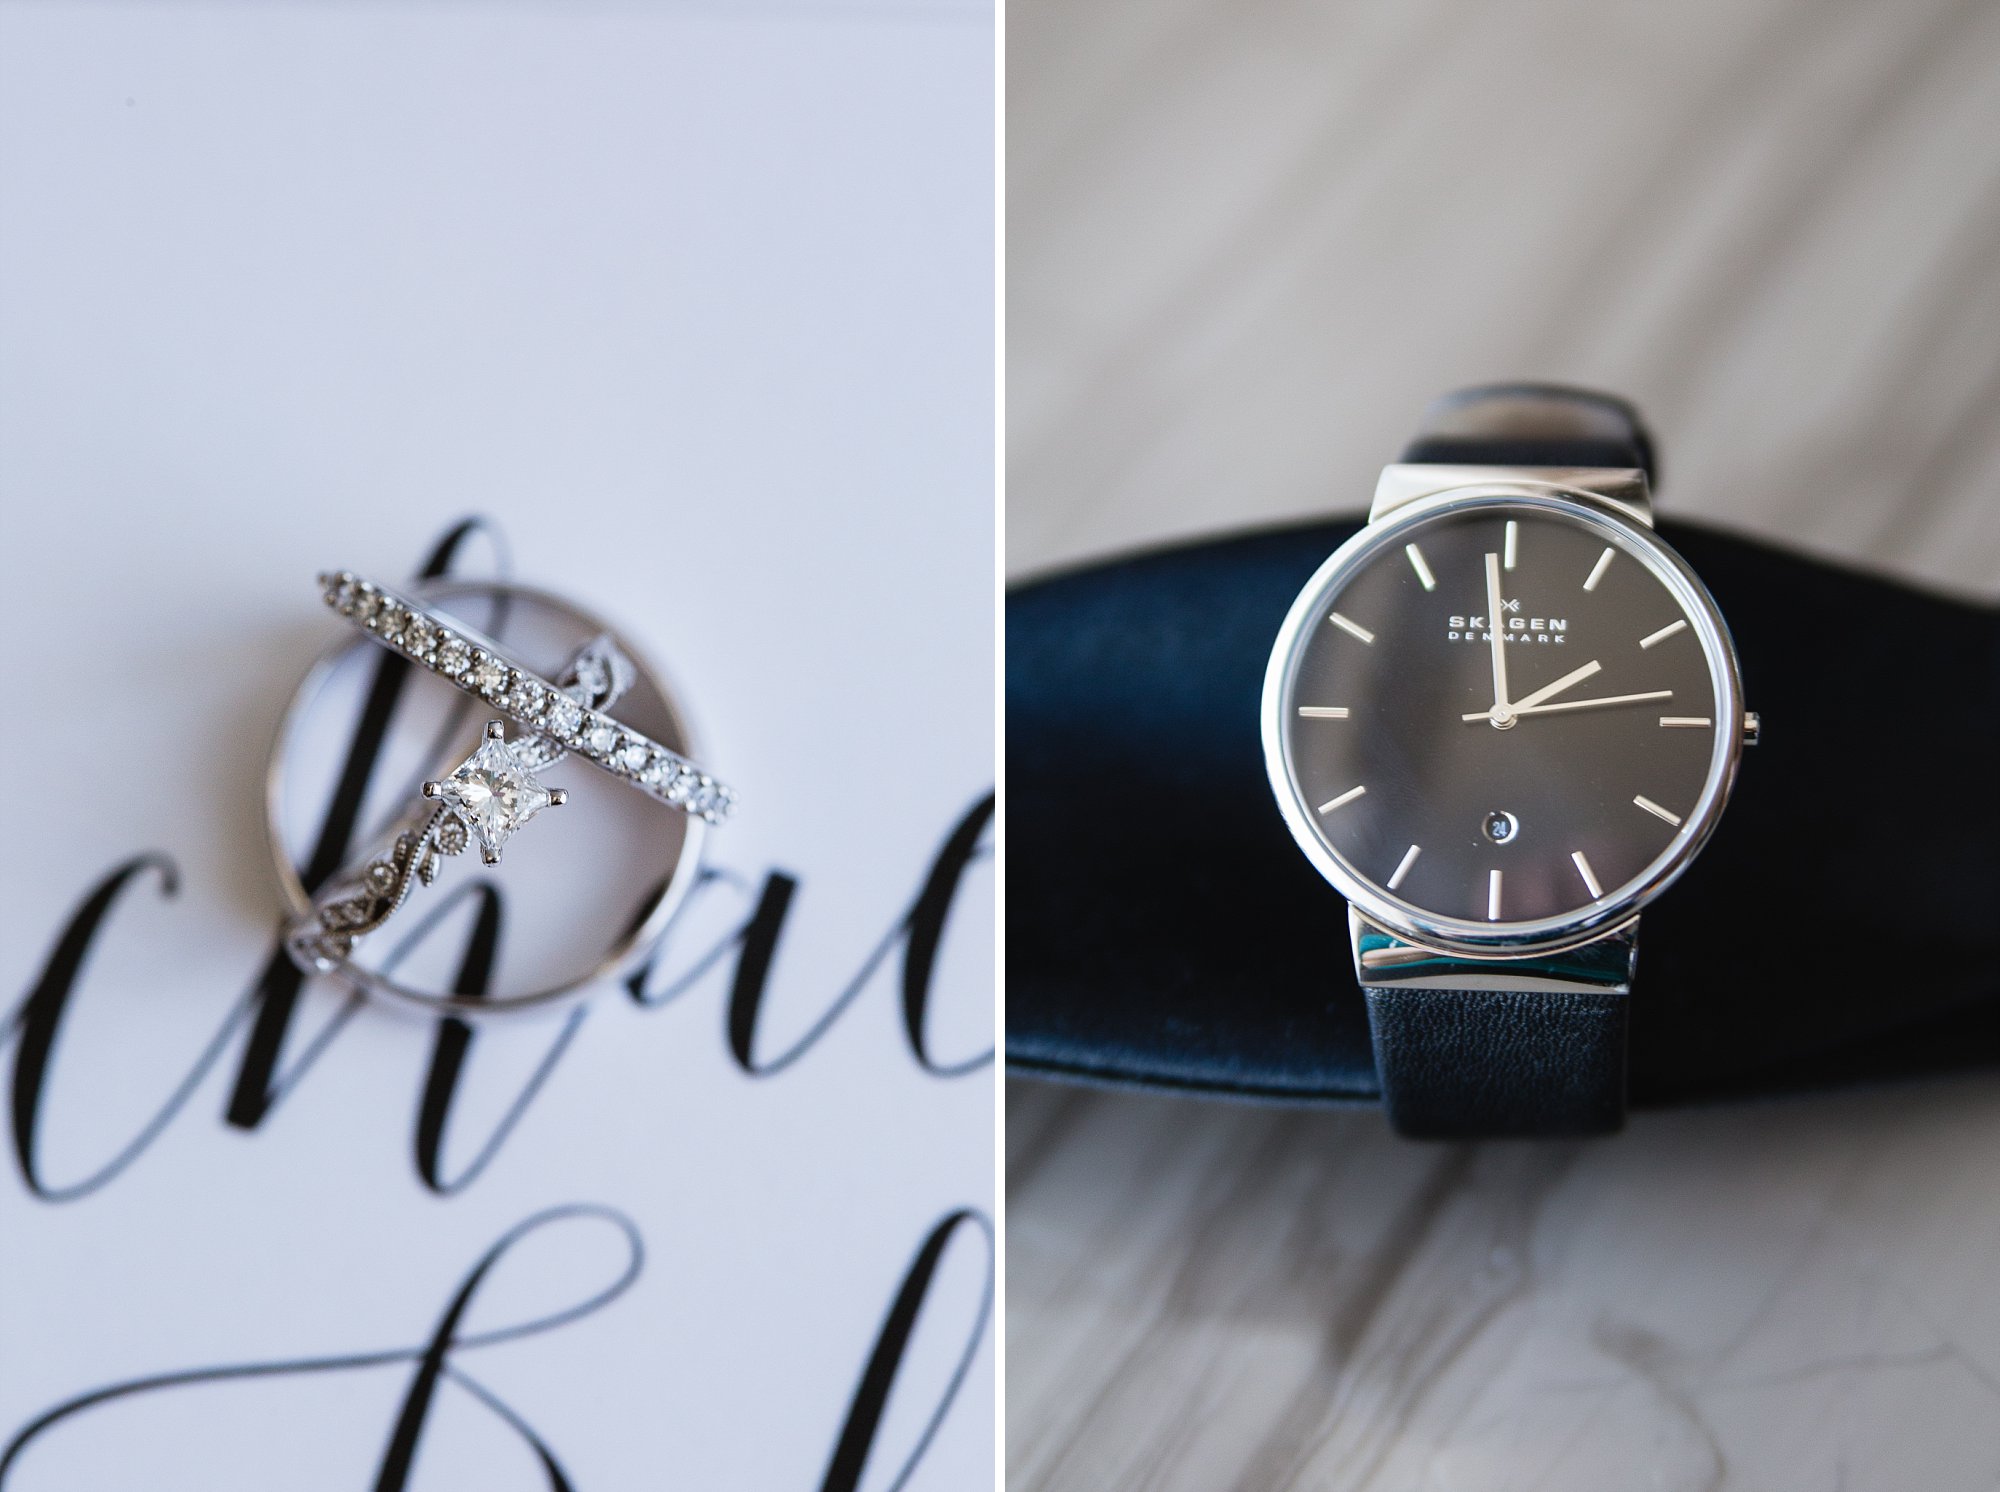 Paired images of wedding details: Three wedding rings on a wedding invitation and the grooms watch.